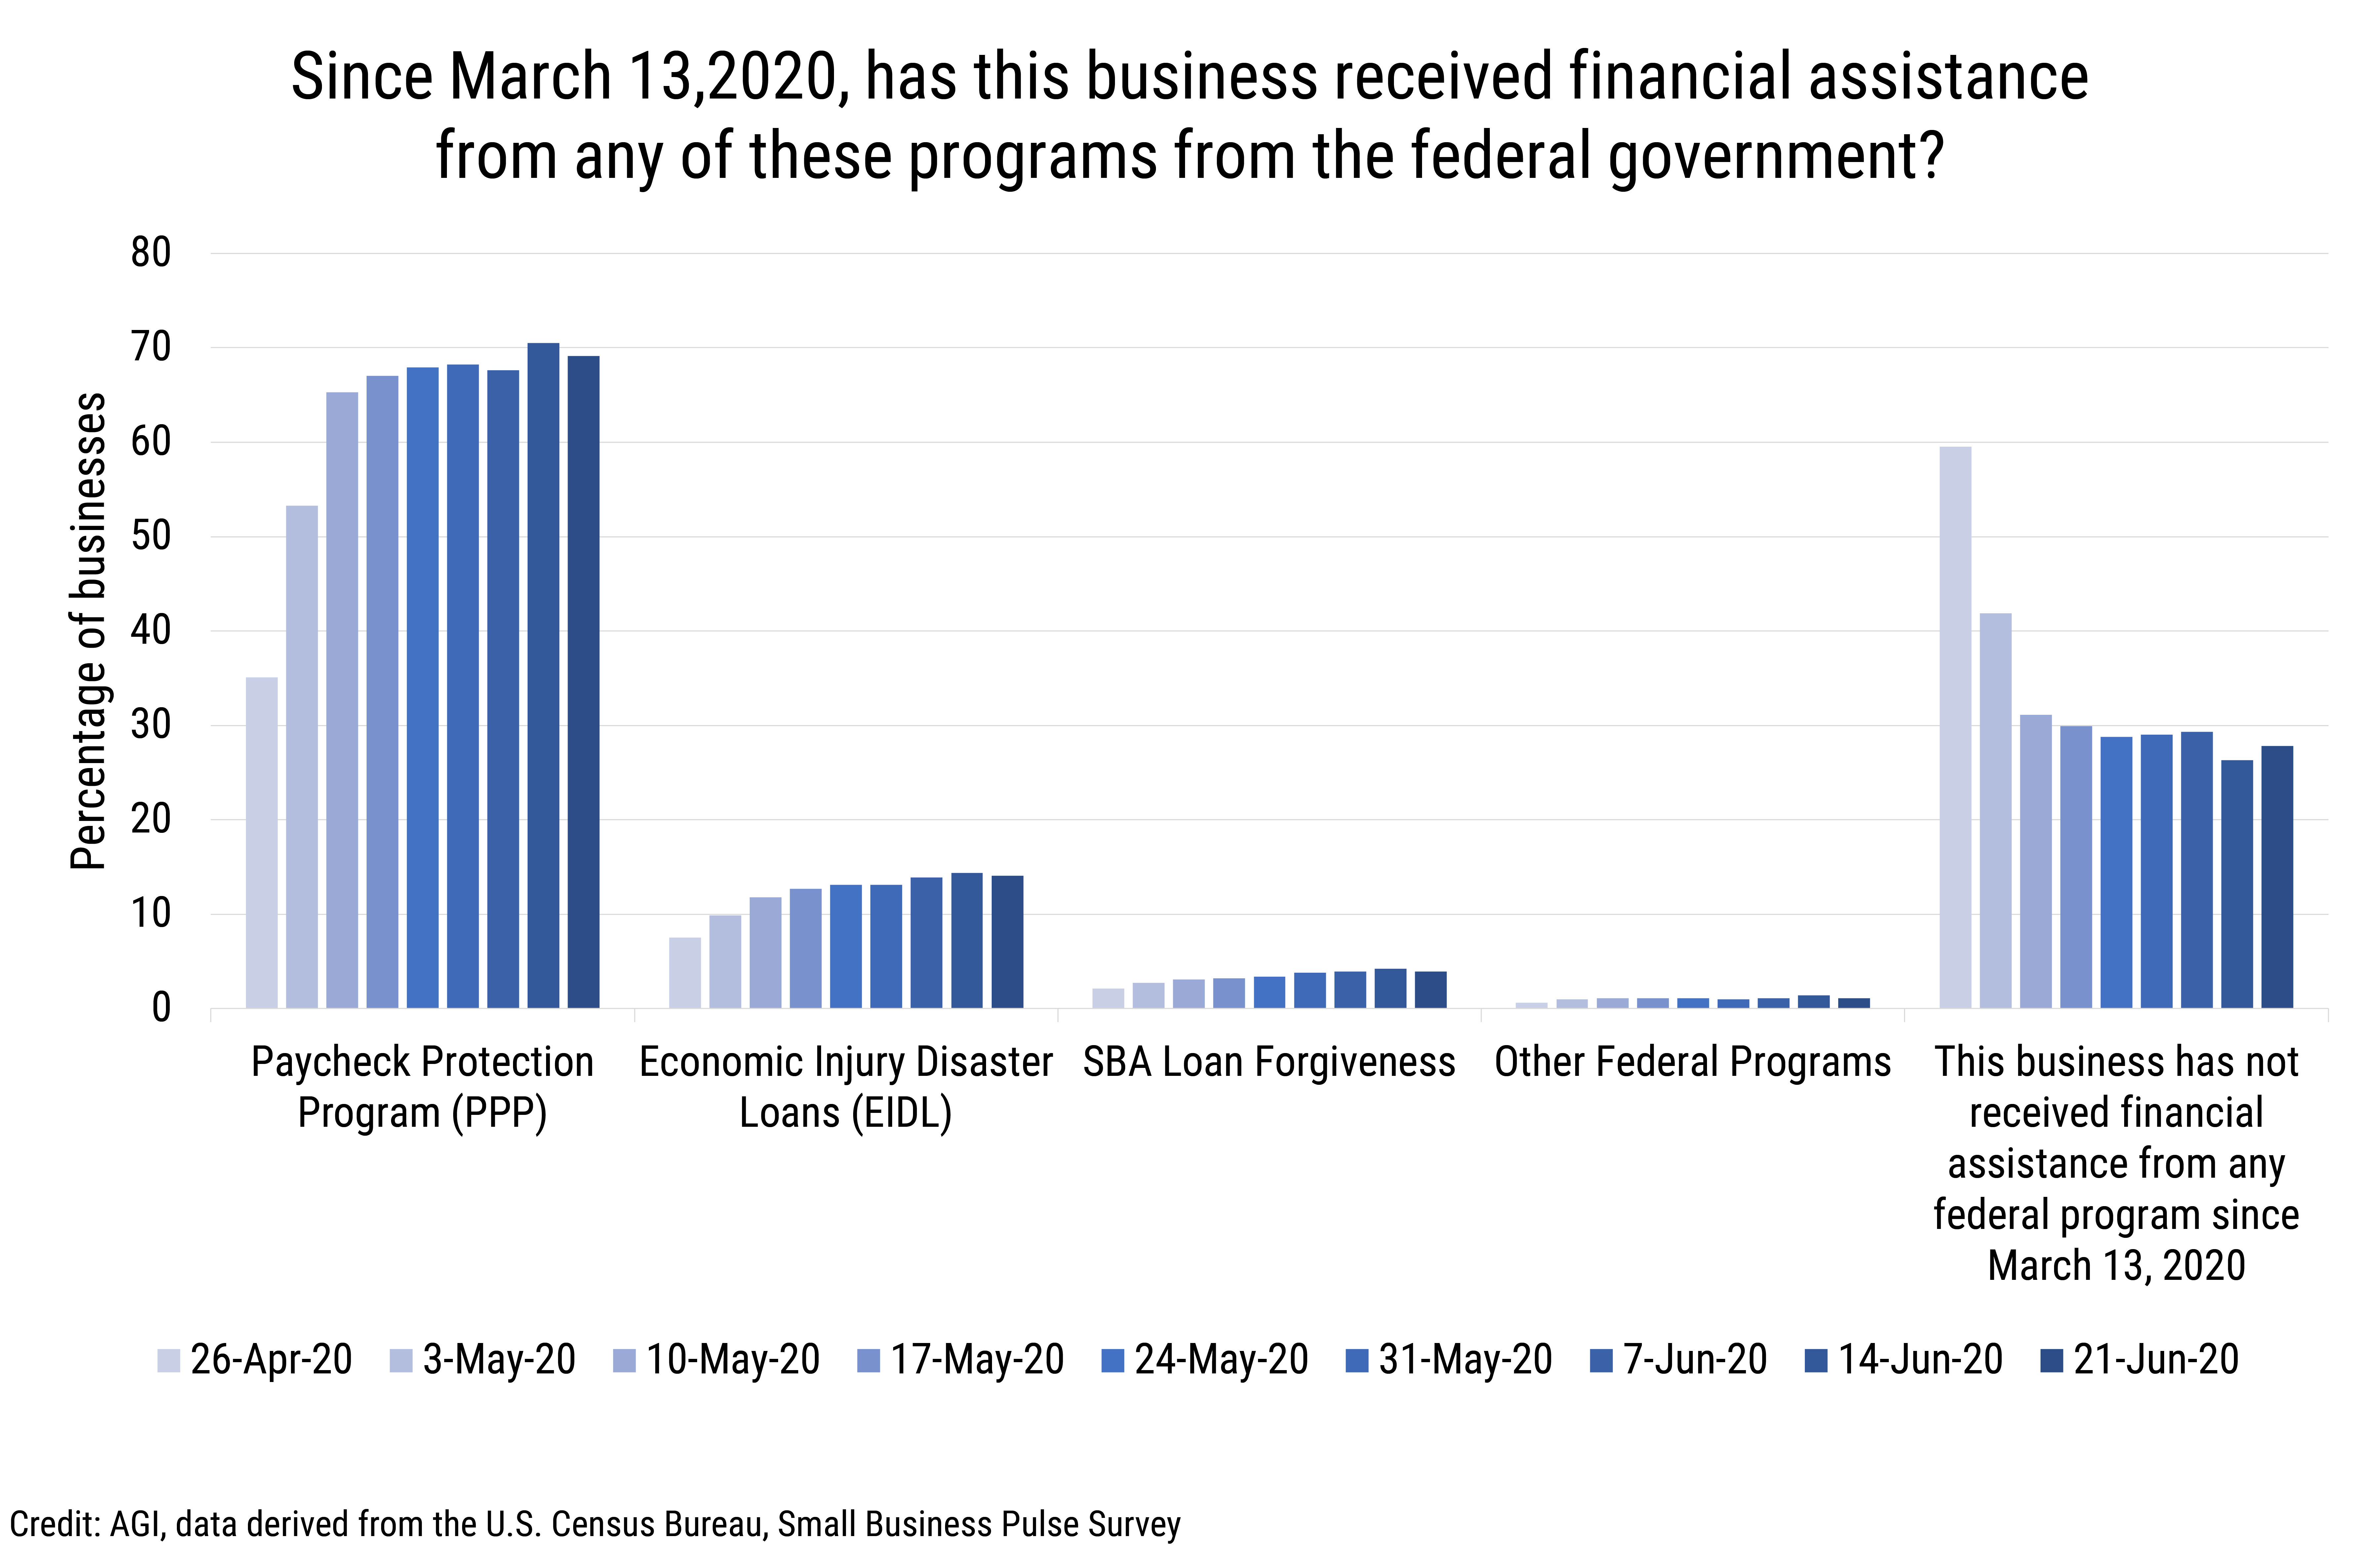 DB_2020-014 chart 03: Sources of Received Financial Aid (credit: AGI, data derived from the U.S. Census Bureau, Small Business Pulse Survey)